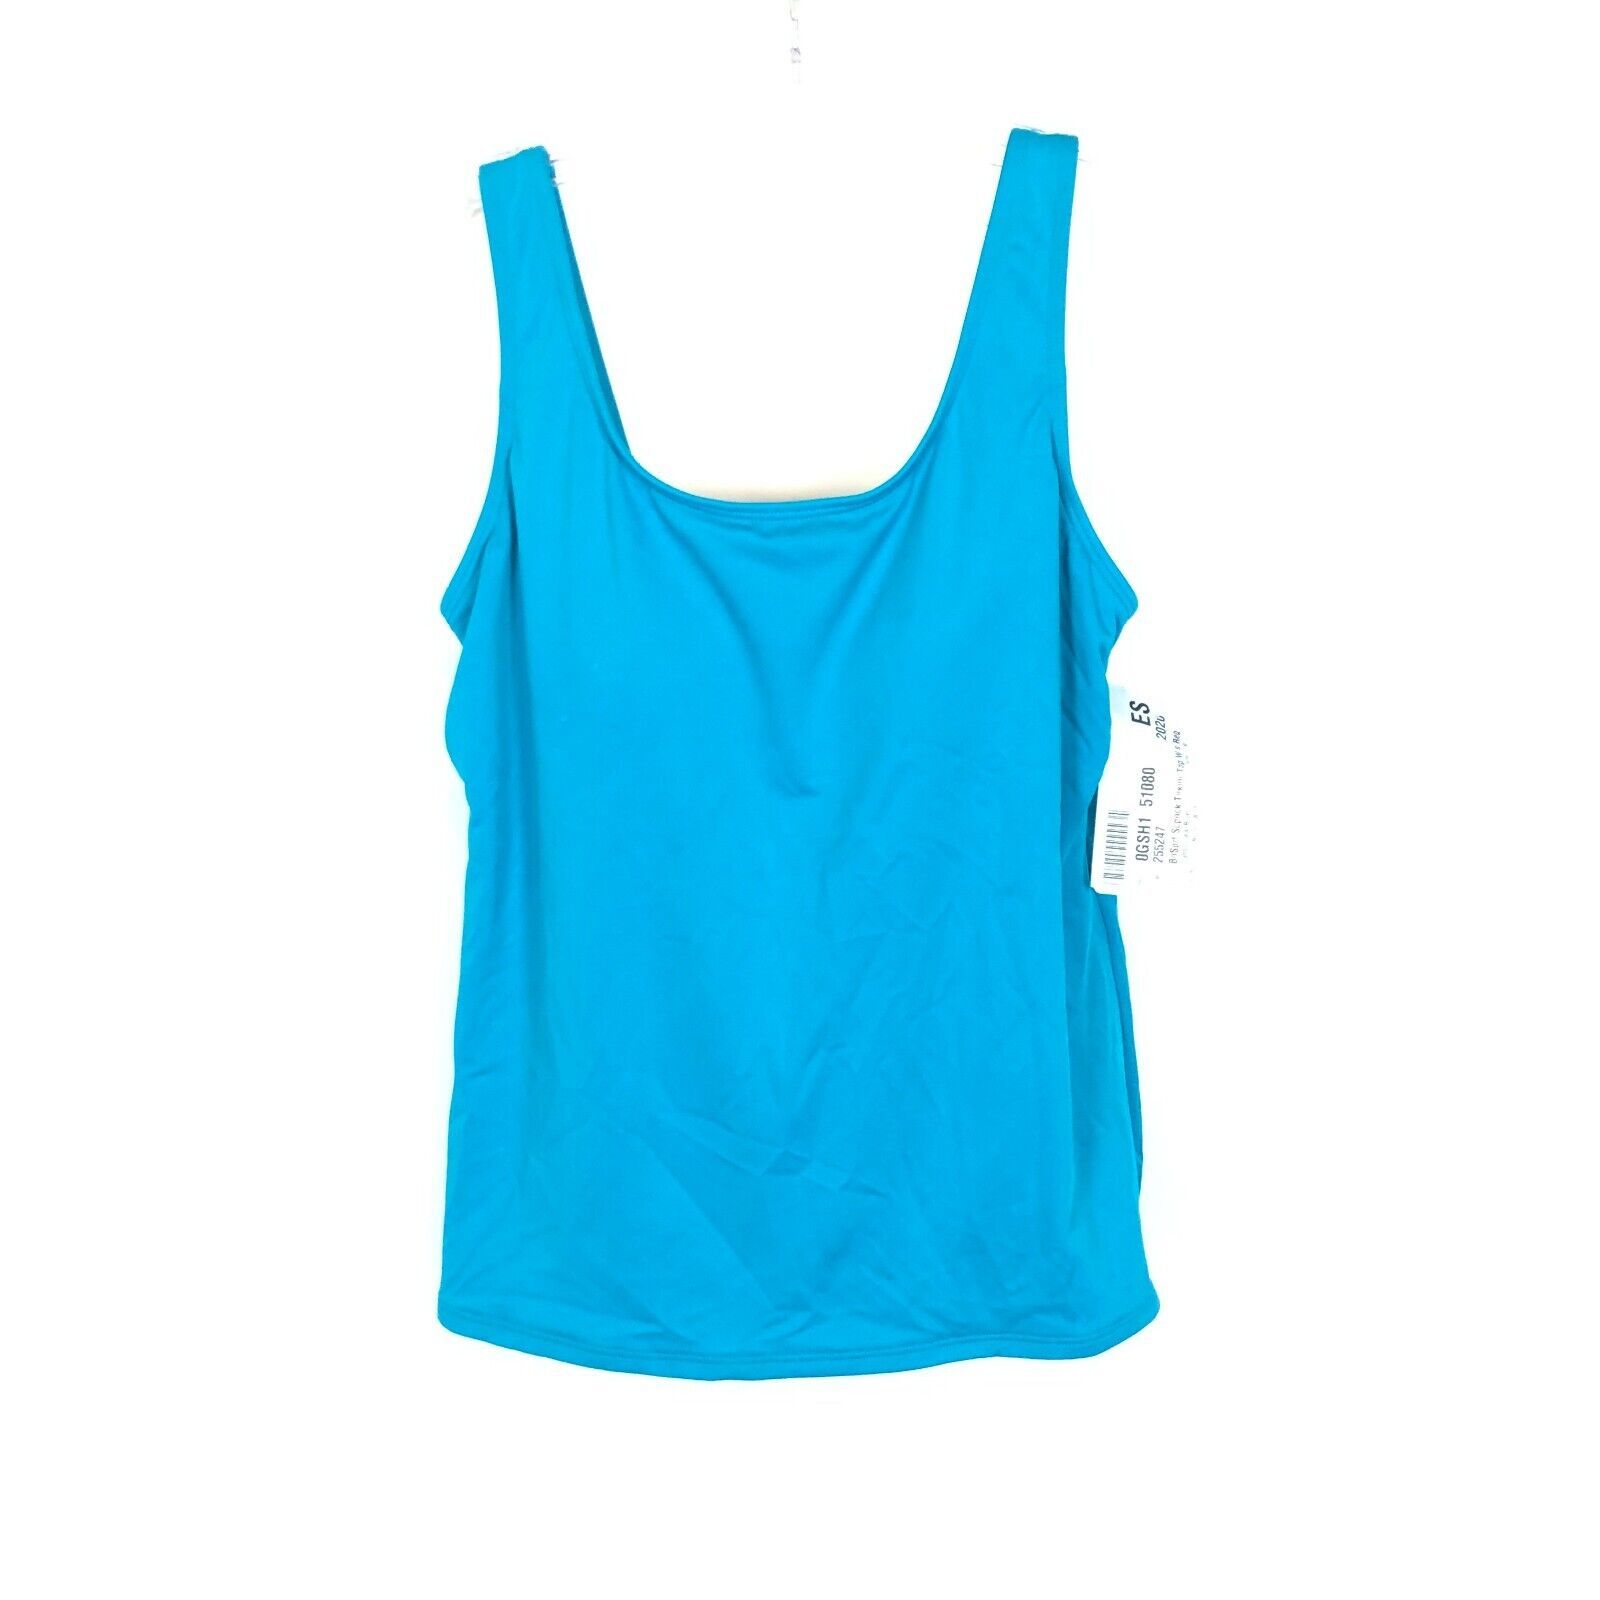 Primary image for NWT Womens Size 8 LL Bean Blue Tankini Top Scoopneck BeanSport Swimwear Top